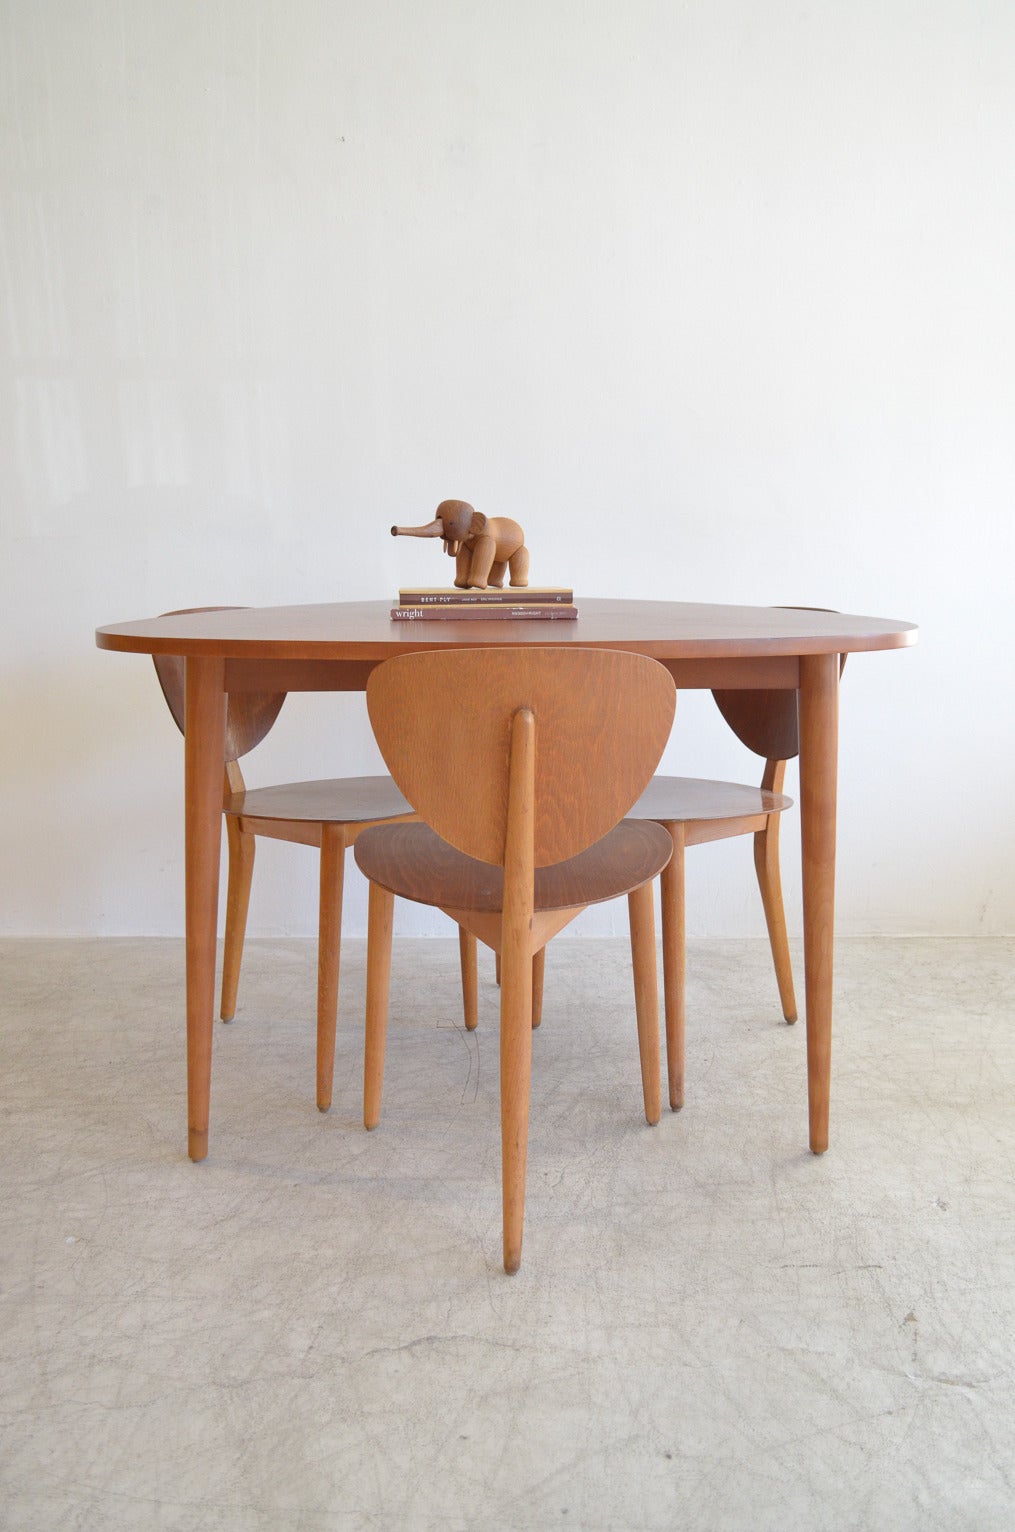 Important and very rare Max Bill tripod or guitar pick shaped dining table and chairs. Molded birch, professionally restored in excellent condition.

The table has a beautiful star grain design and the matching chairs compliment nicely. Marked on